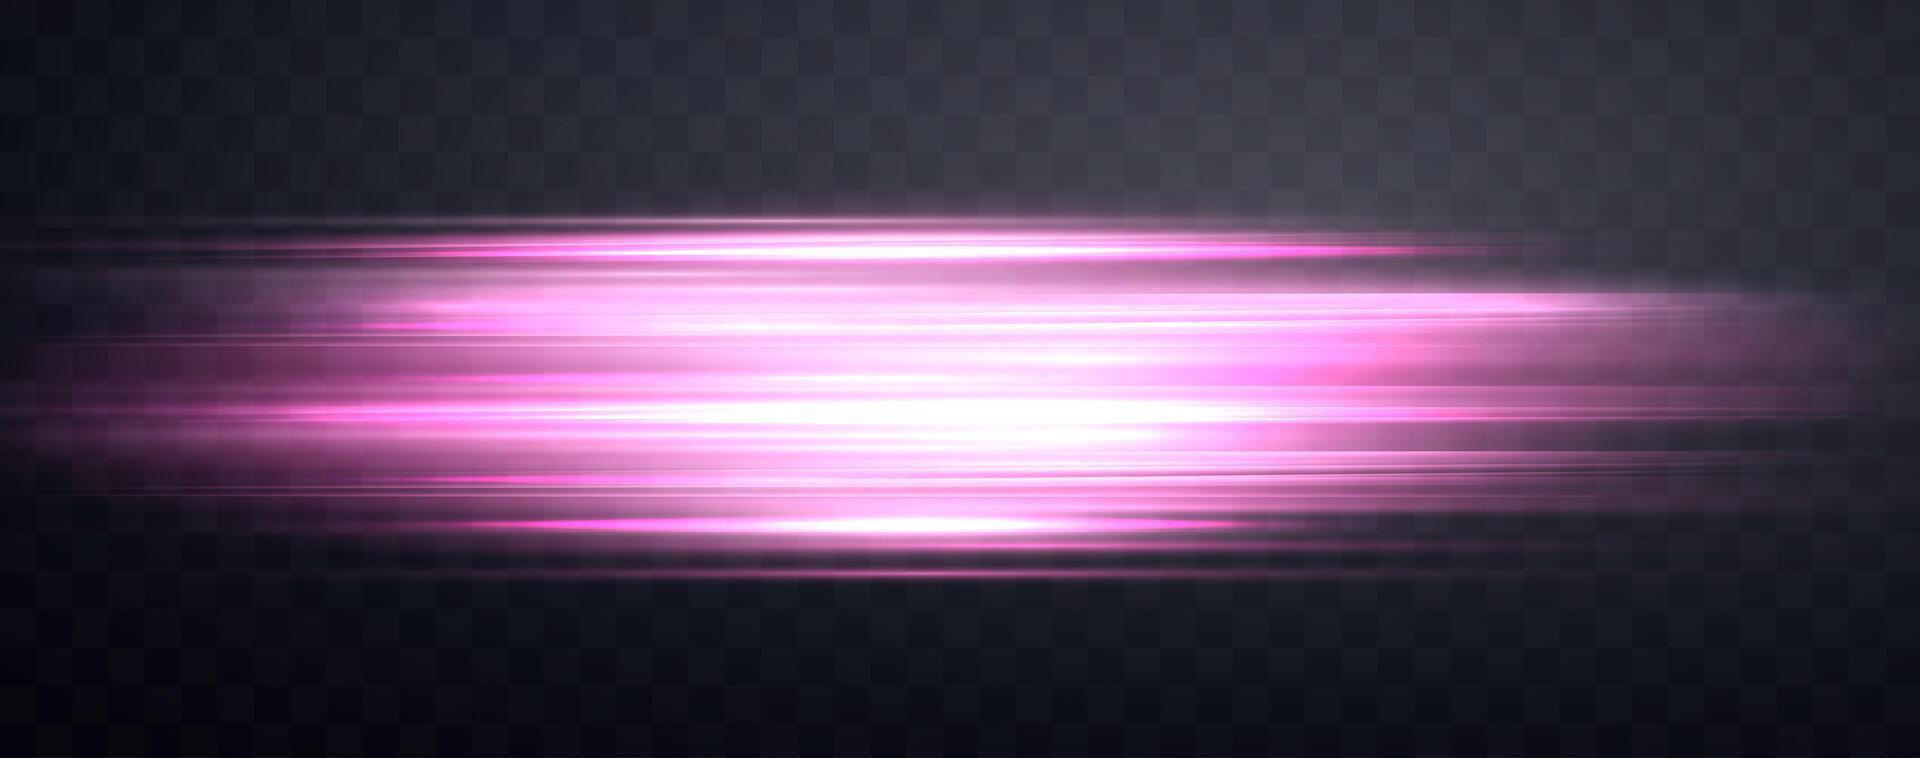 Speed rays, velocity light neon flow, zoom in motion effect, pink glow speed lines, colorful light trails, stripes. Abstract background, vector illustration.